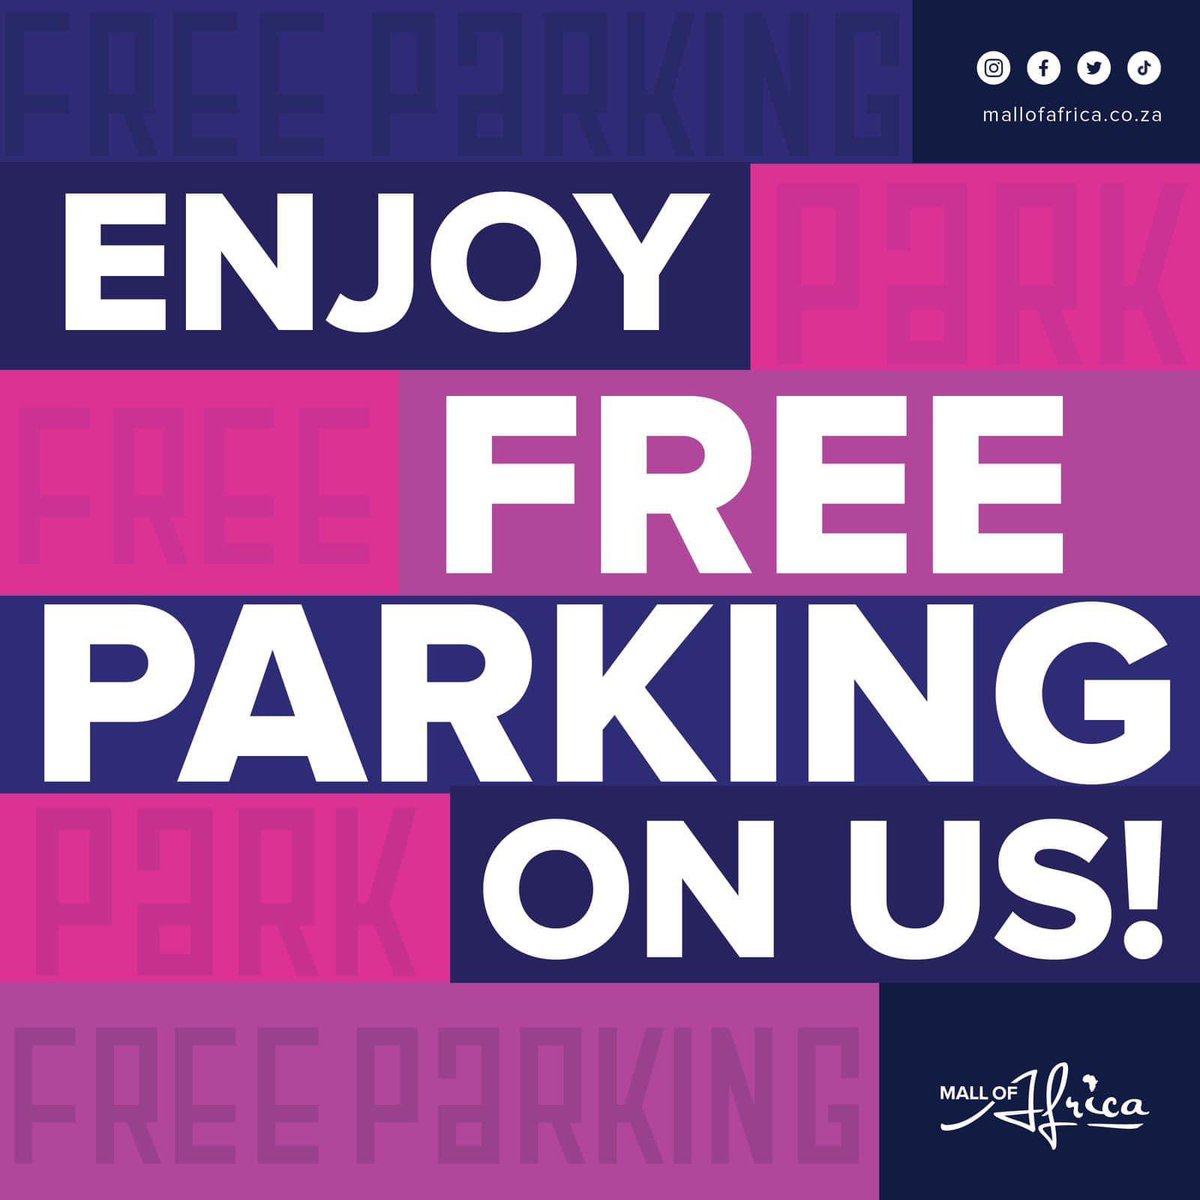 It’s our birthday, and we’re turning up the fun at Mall of Africa 🥳

Enjoy FREE parking on us today only! Indulge in a day of endless shopping, mouthwatering dining and non-stop entertainment 🛍️🍴

#MallOfAfrica #HappyBirthdayMOA #FreeParking #ParkOnUs #ShopDineCelebrate